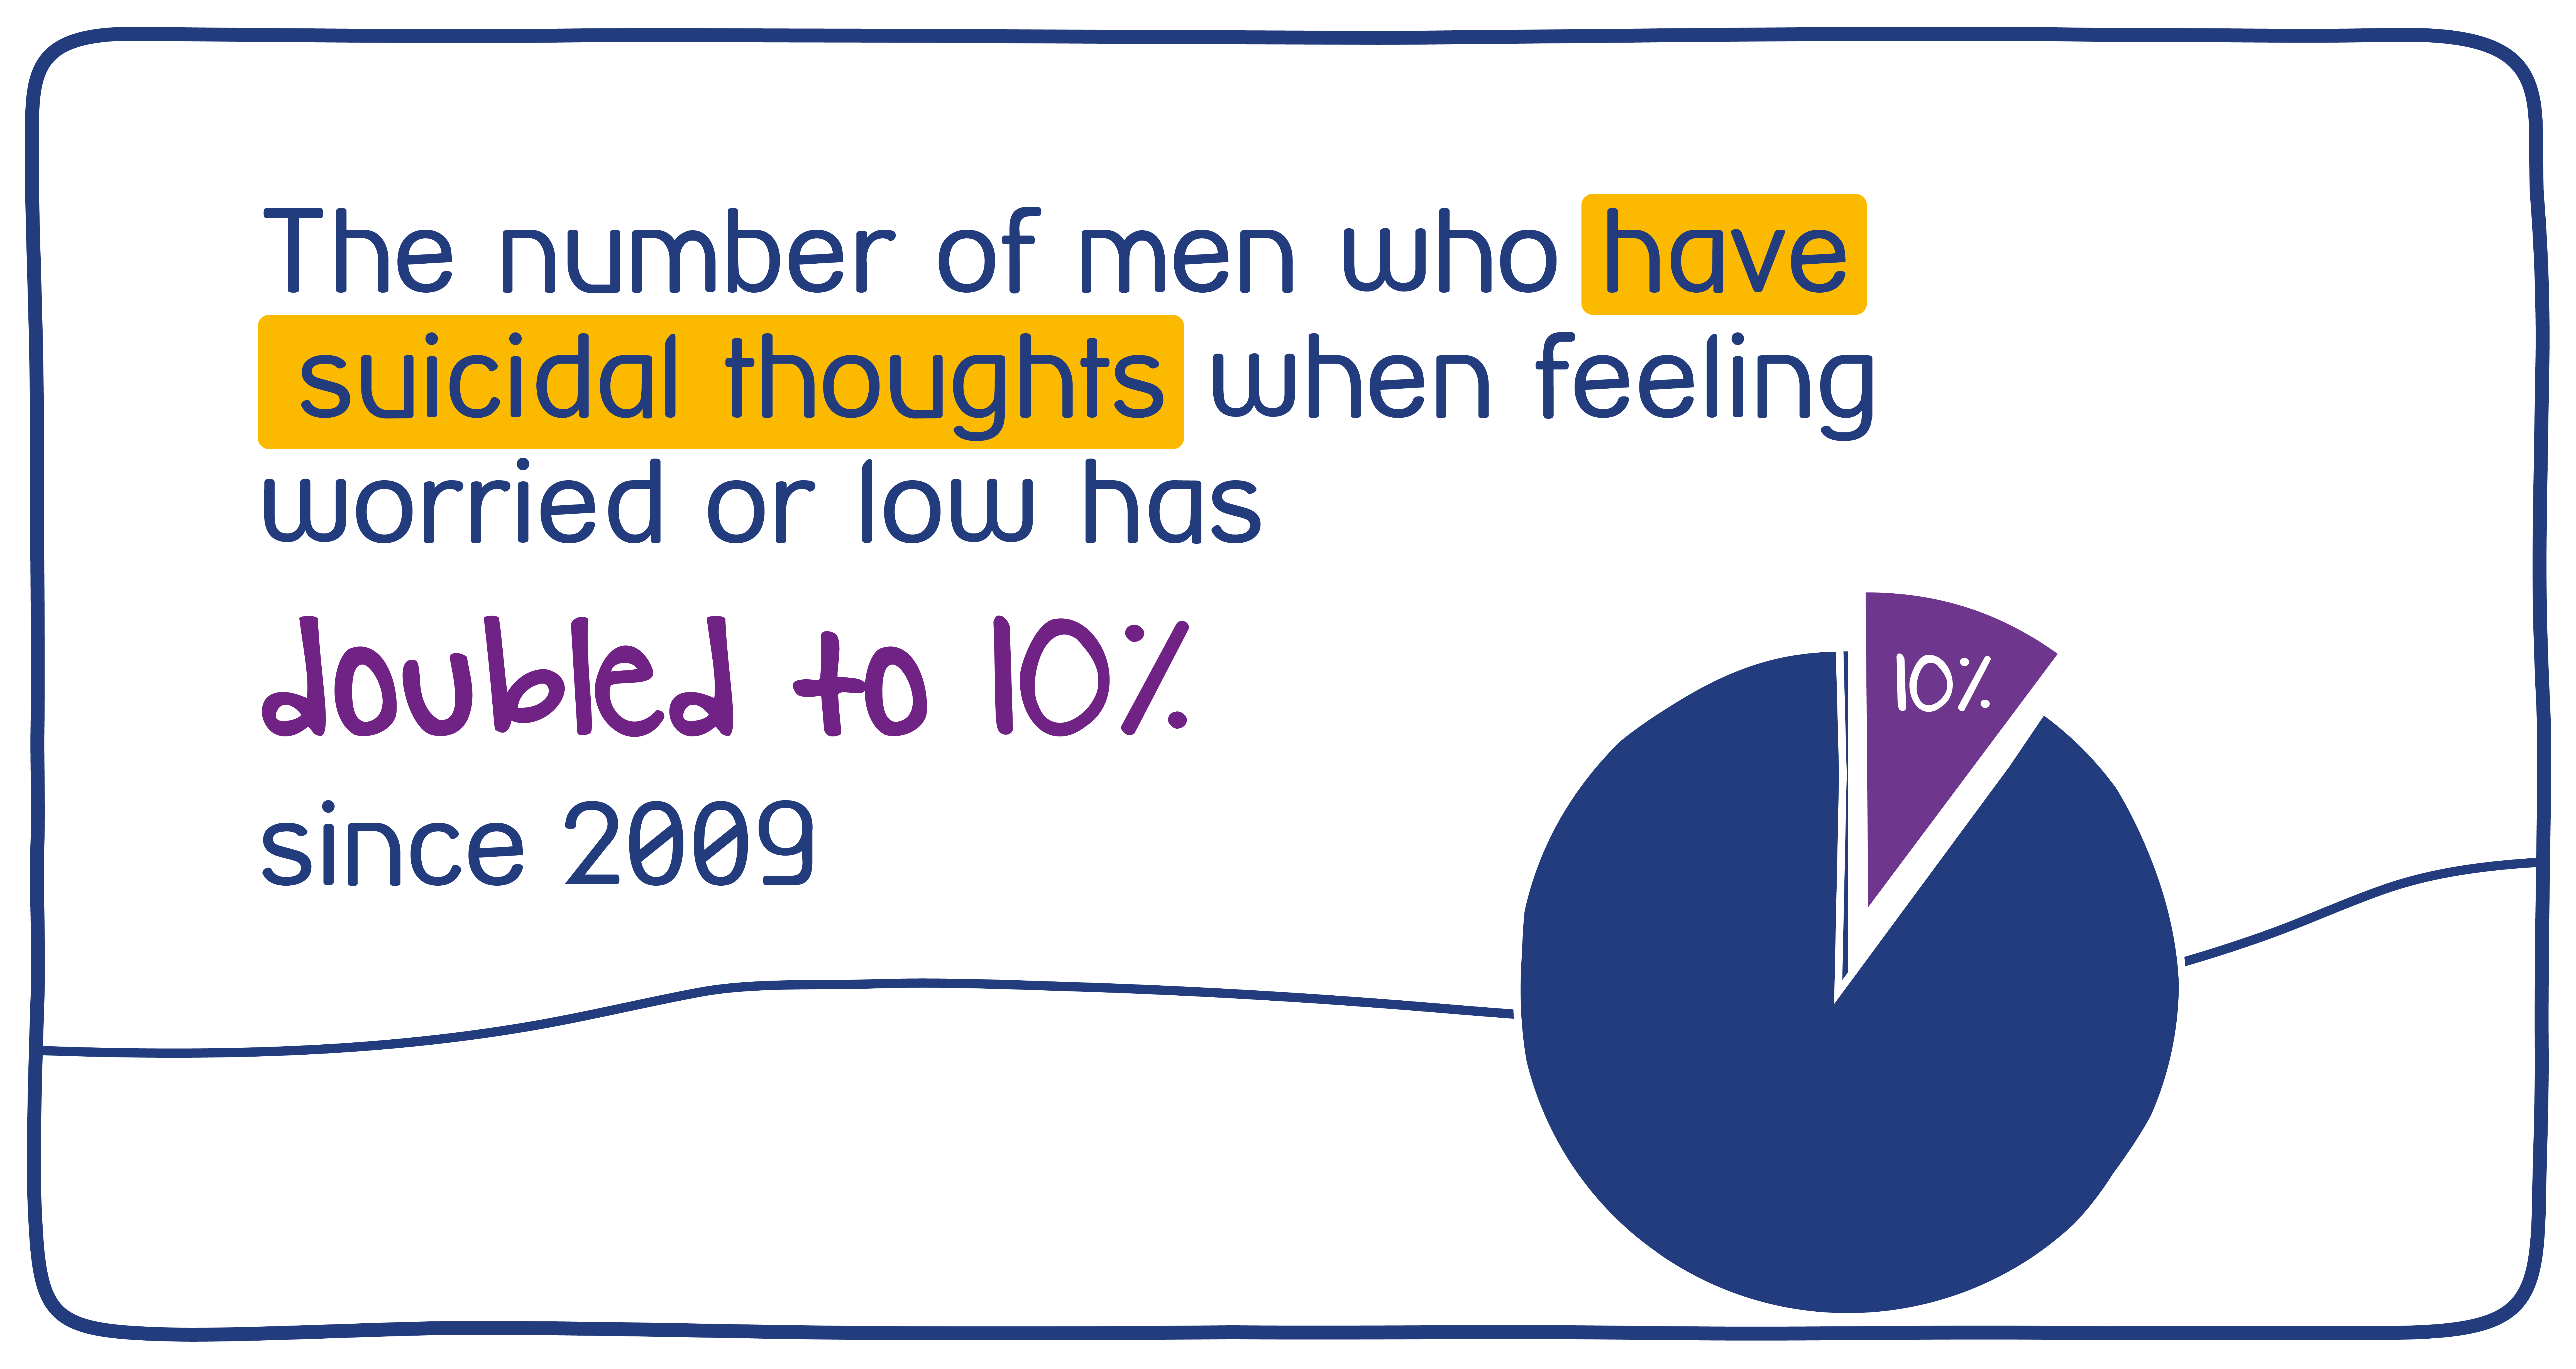 The number of men having suicidal thoughts when worried or low had doubled